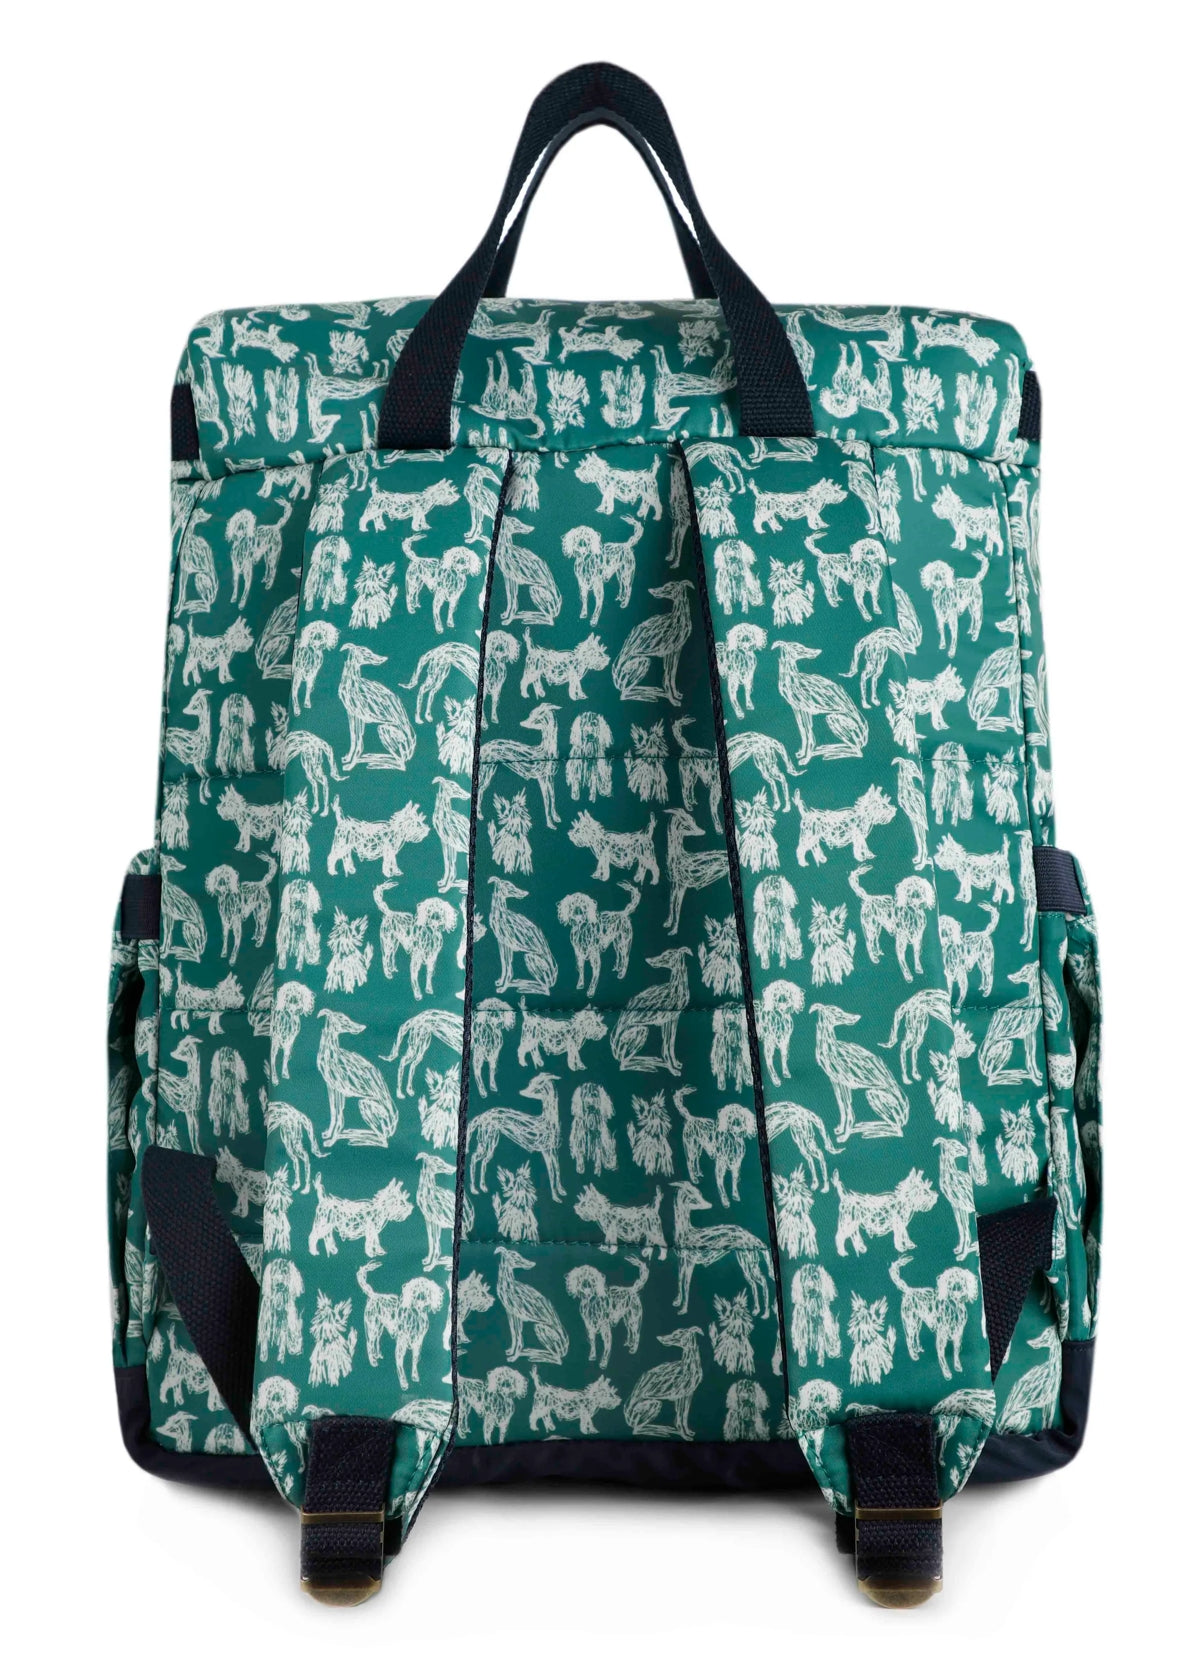 Nahla dog printed backpack from Weird Fish in Dark Jade Green with padded adjustable straps.